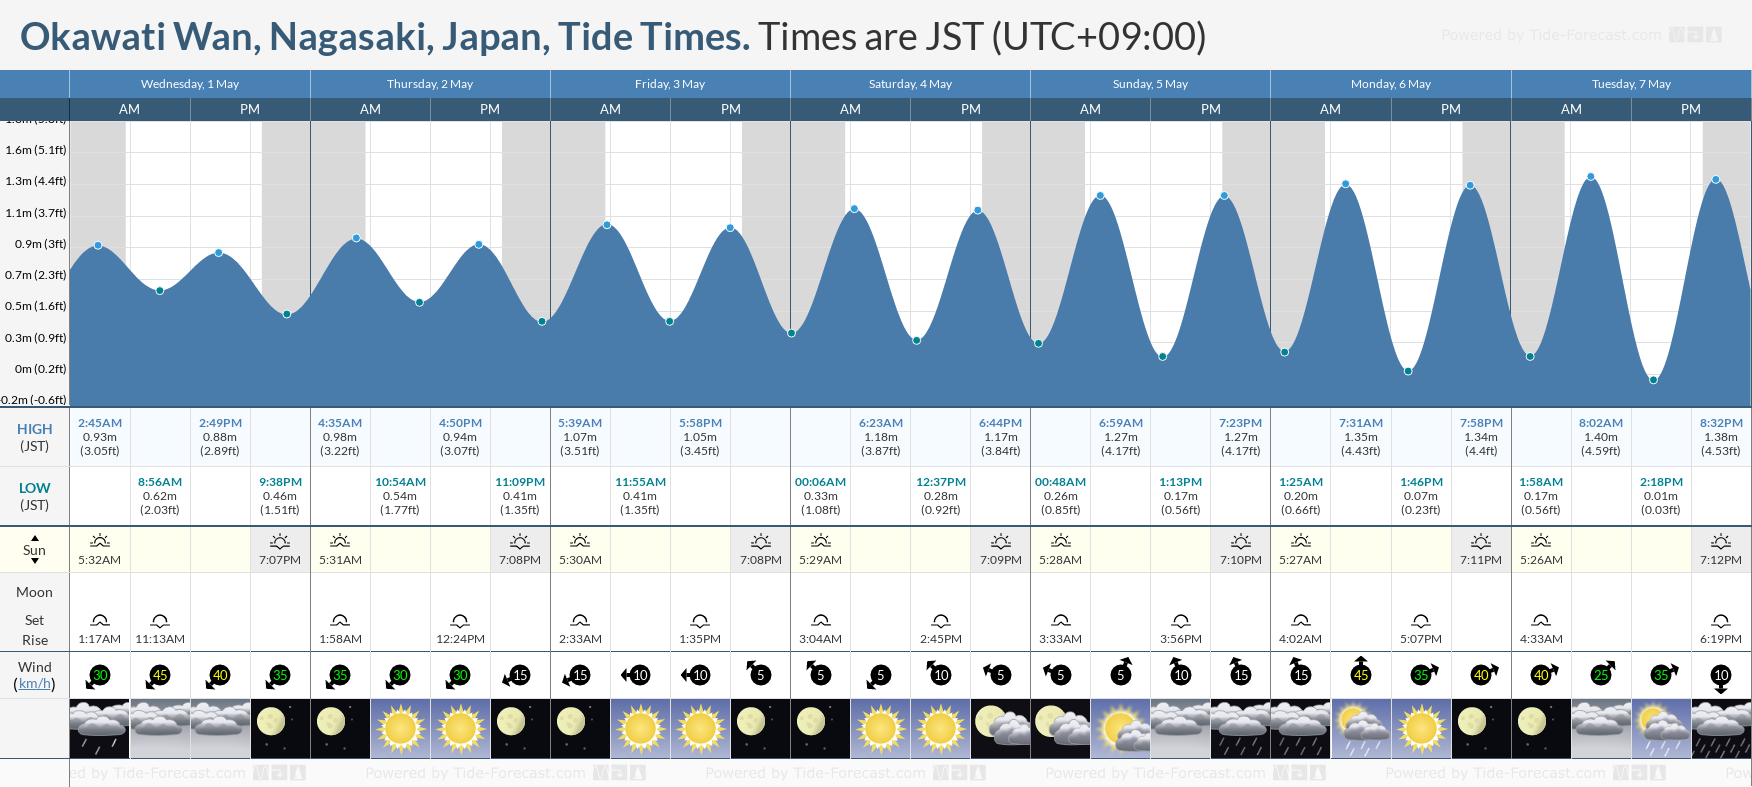 Okawati Wan, Nagasaki, Japan Tide Chart including high and low tide tide times for the next 7 days